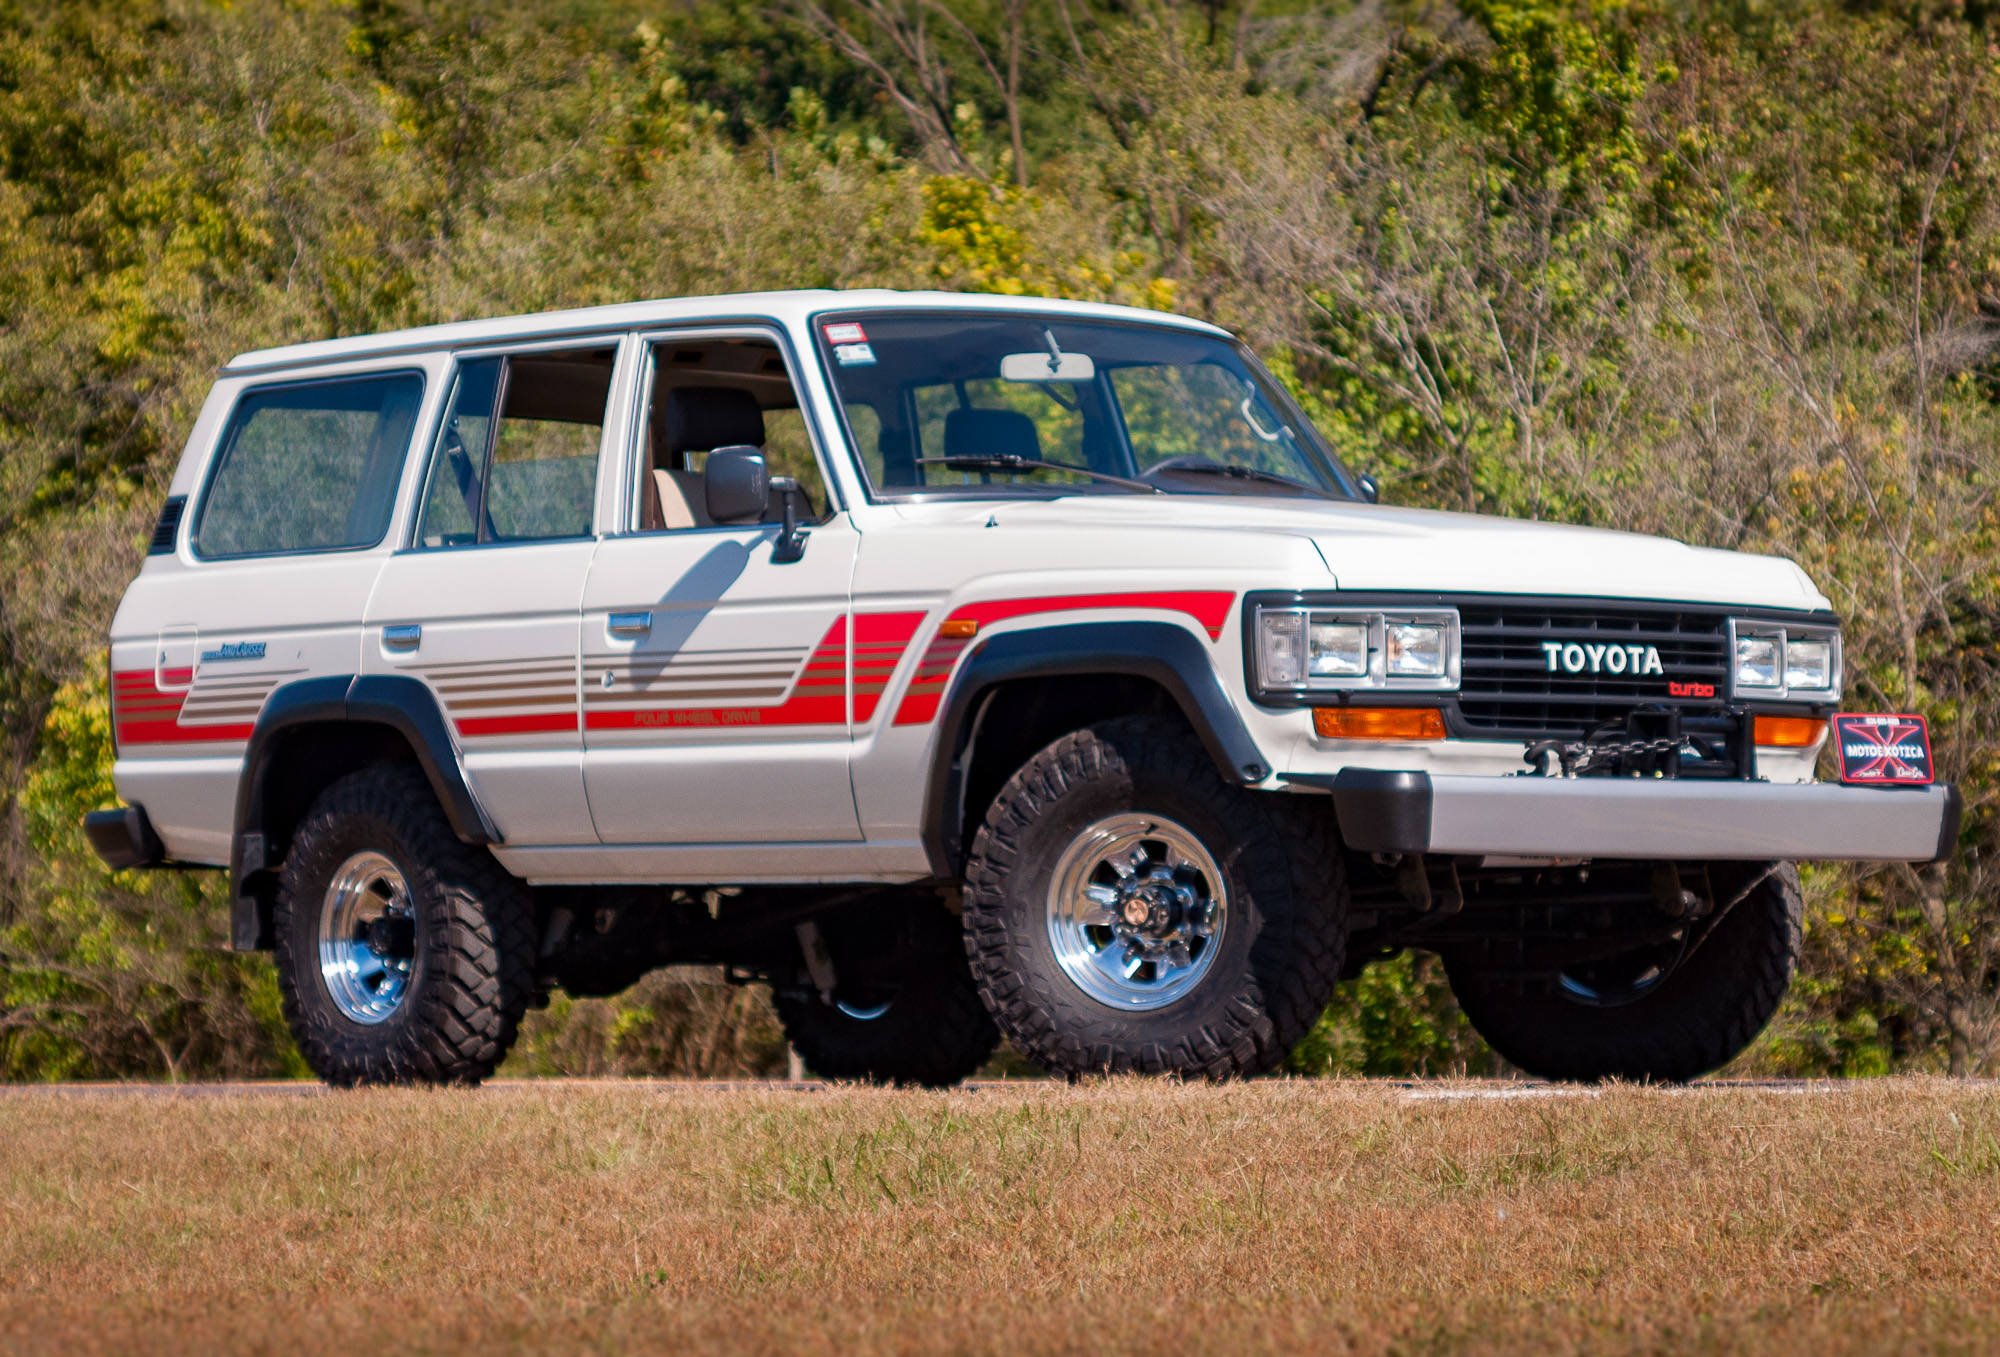 A Time Capsule Condition 1988 Toyota Land Cruiser J60 GX HJ61 Turbo